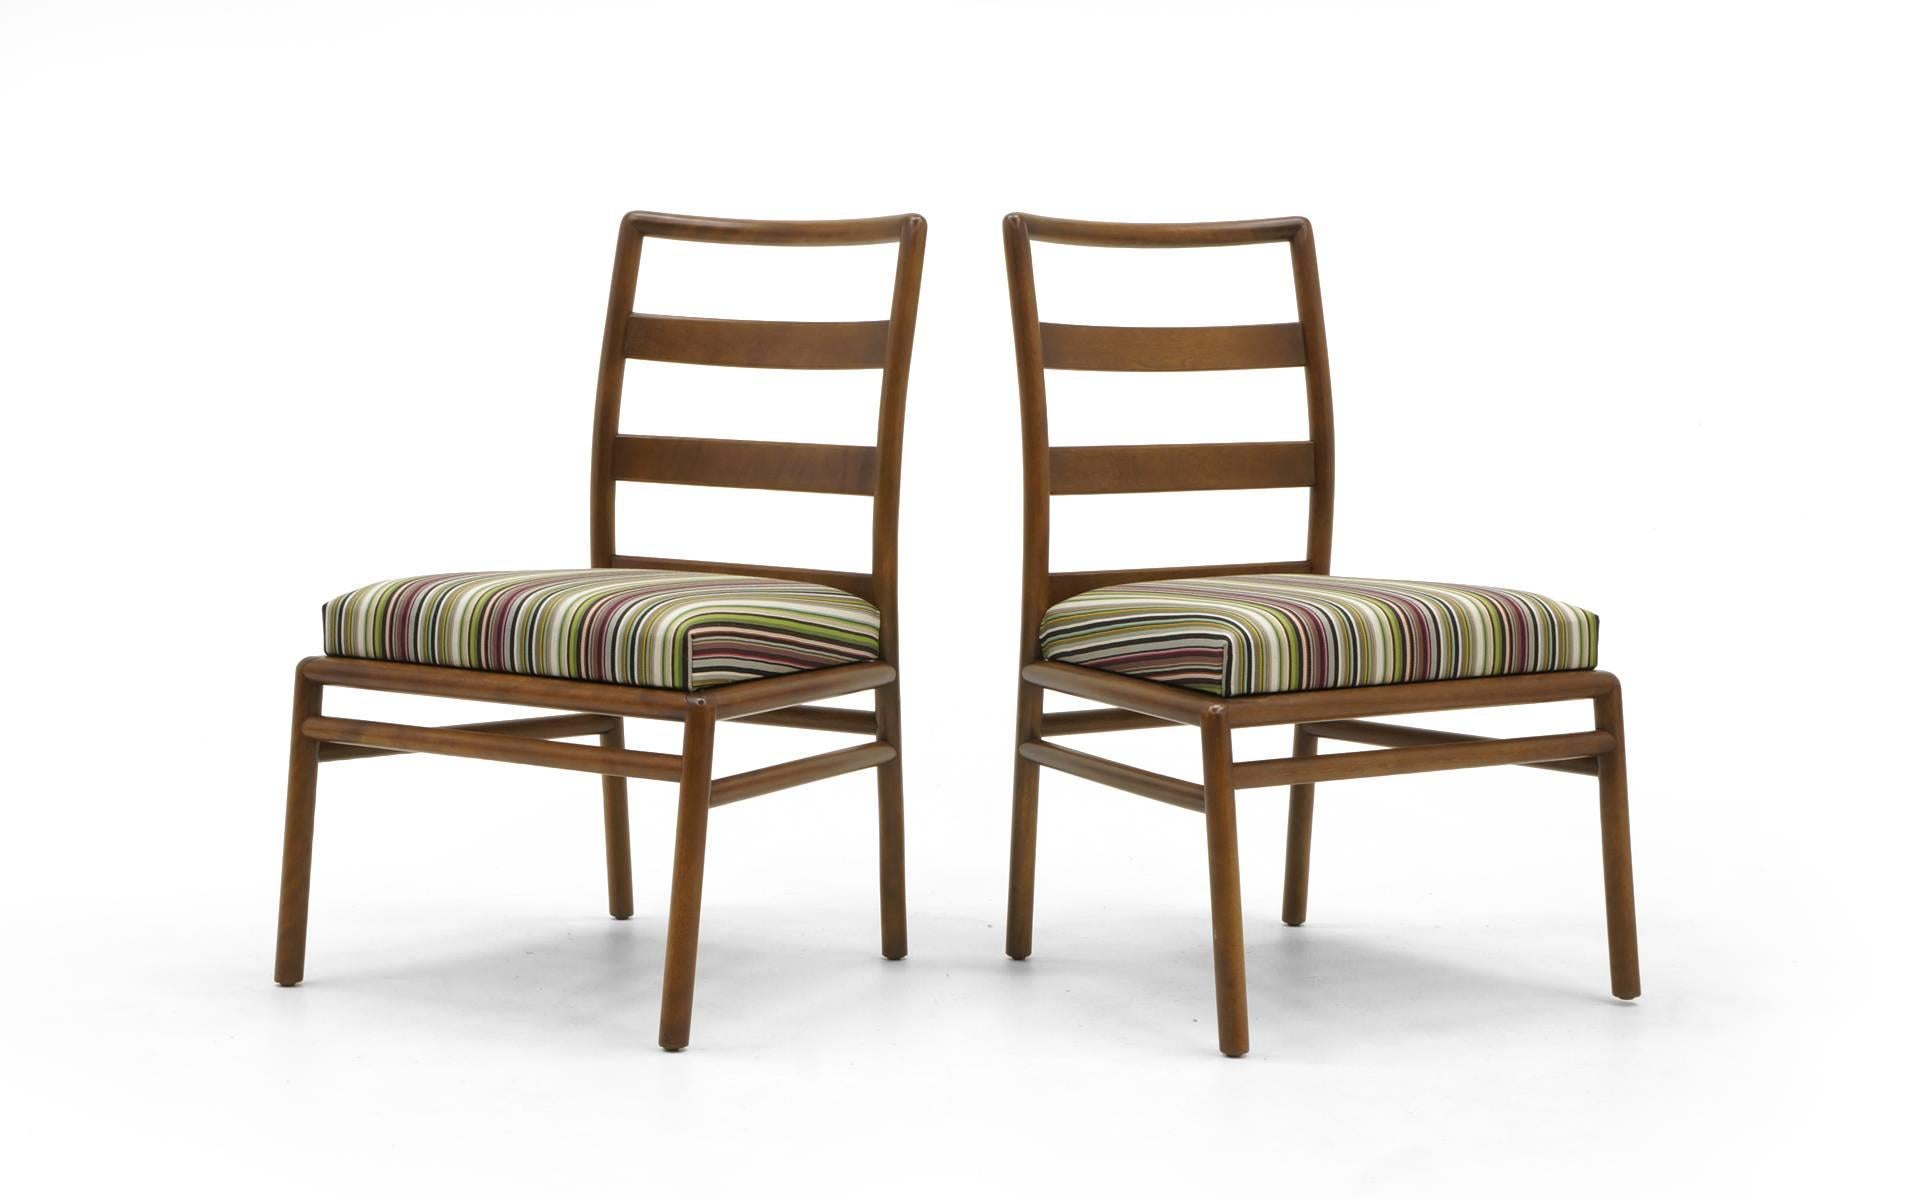 Mid-20th Century Set of 12 Dining Chairs by Robsjohn-Gibbings for Widdicomb, Paul Smith Fabric